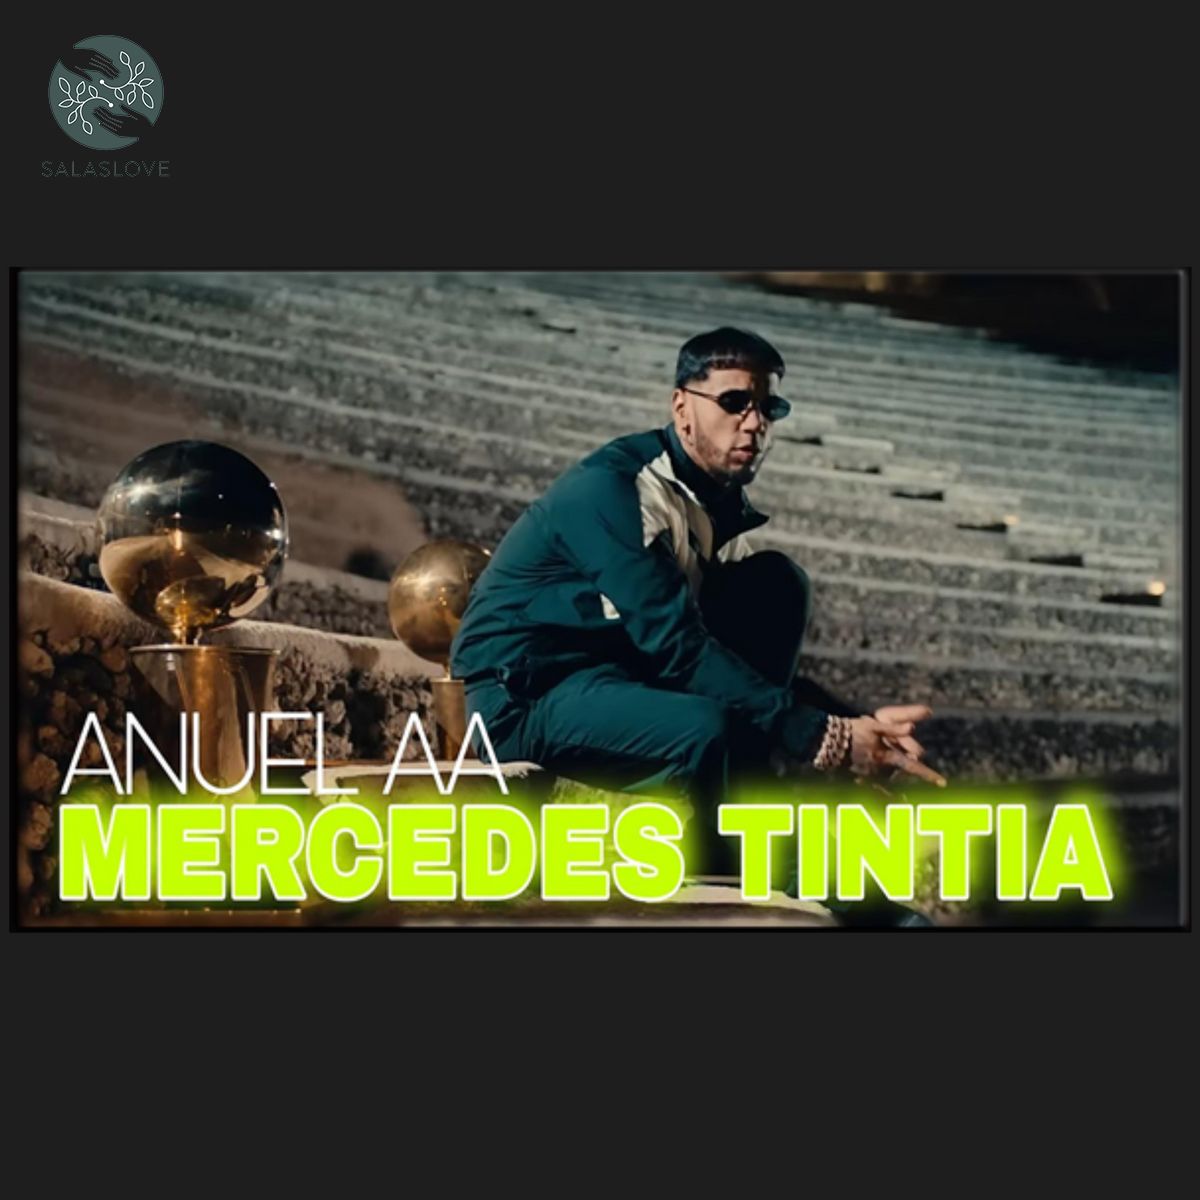 Anuel AA With New Song Mercedes Tintia T-shirt